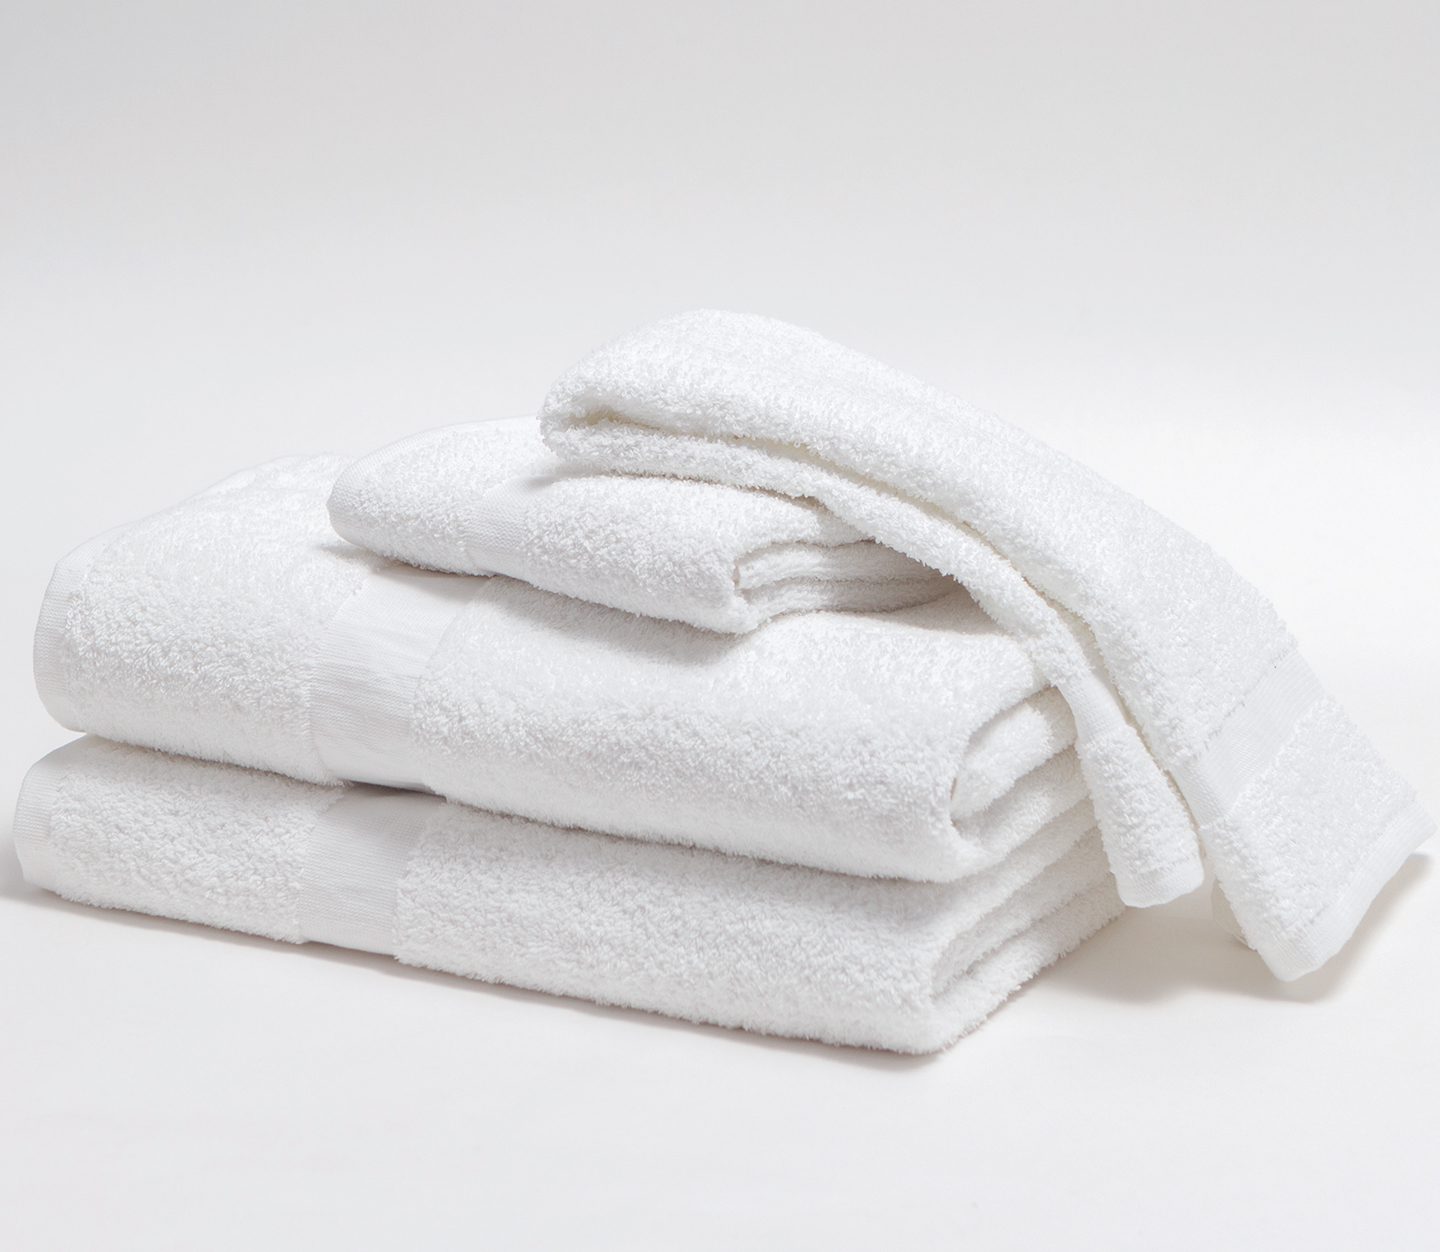 Wholesale Quick Dry Towel Fabric Helps Keep You Clean and Fresh